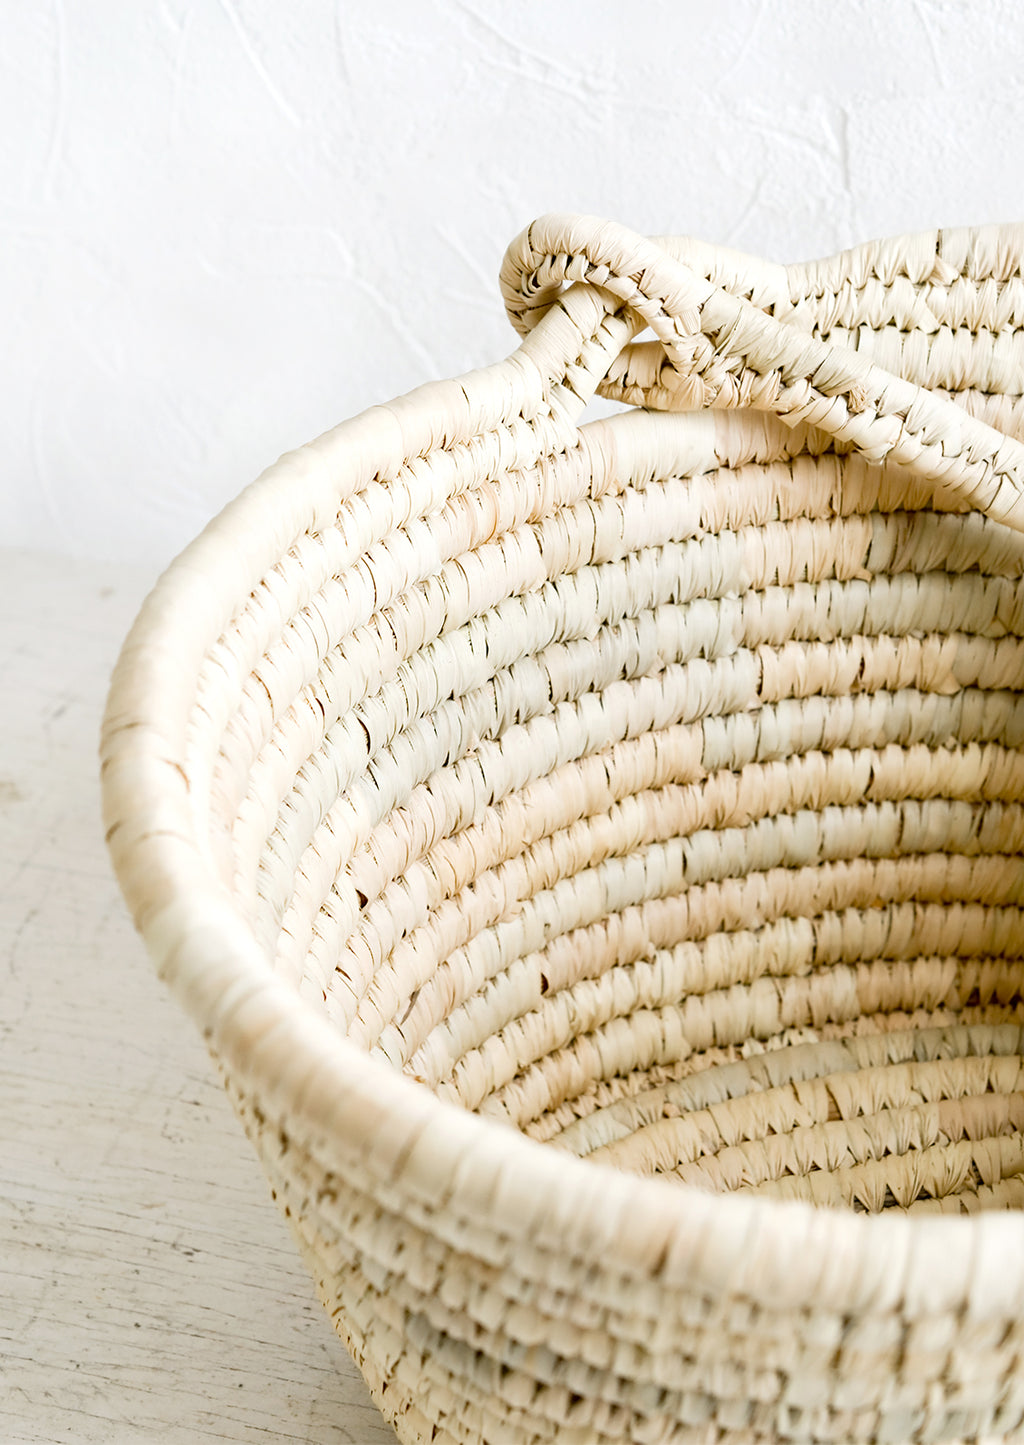 2: A swing-attached carrying handle on a natural straw basket.